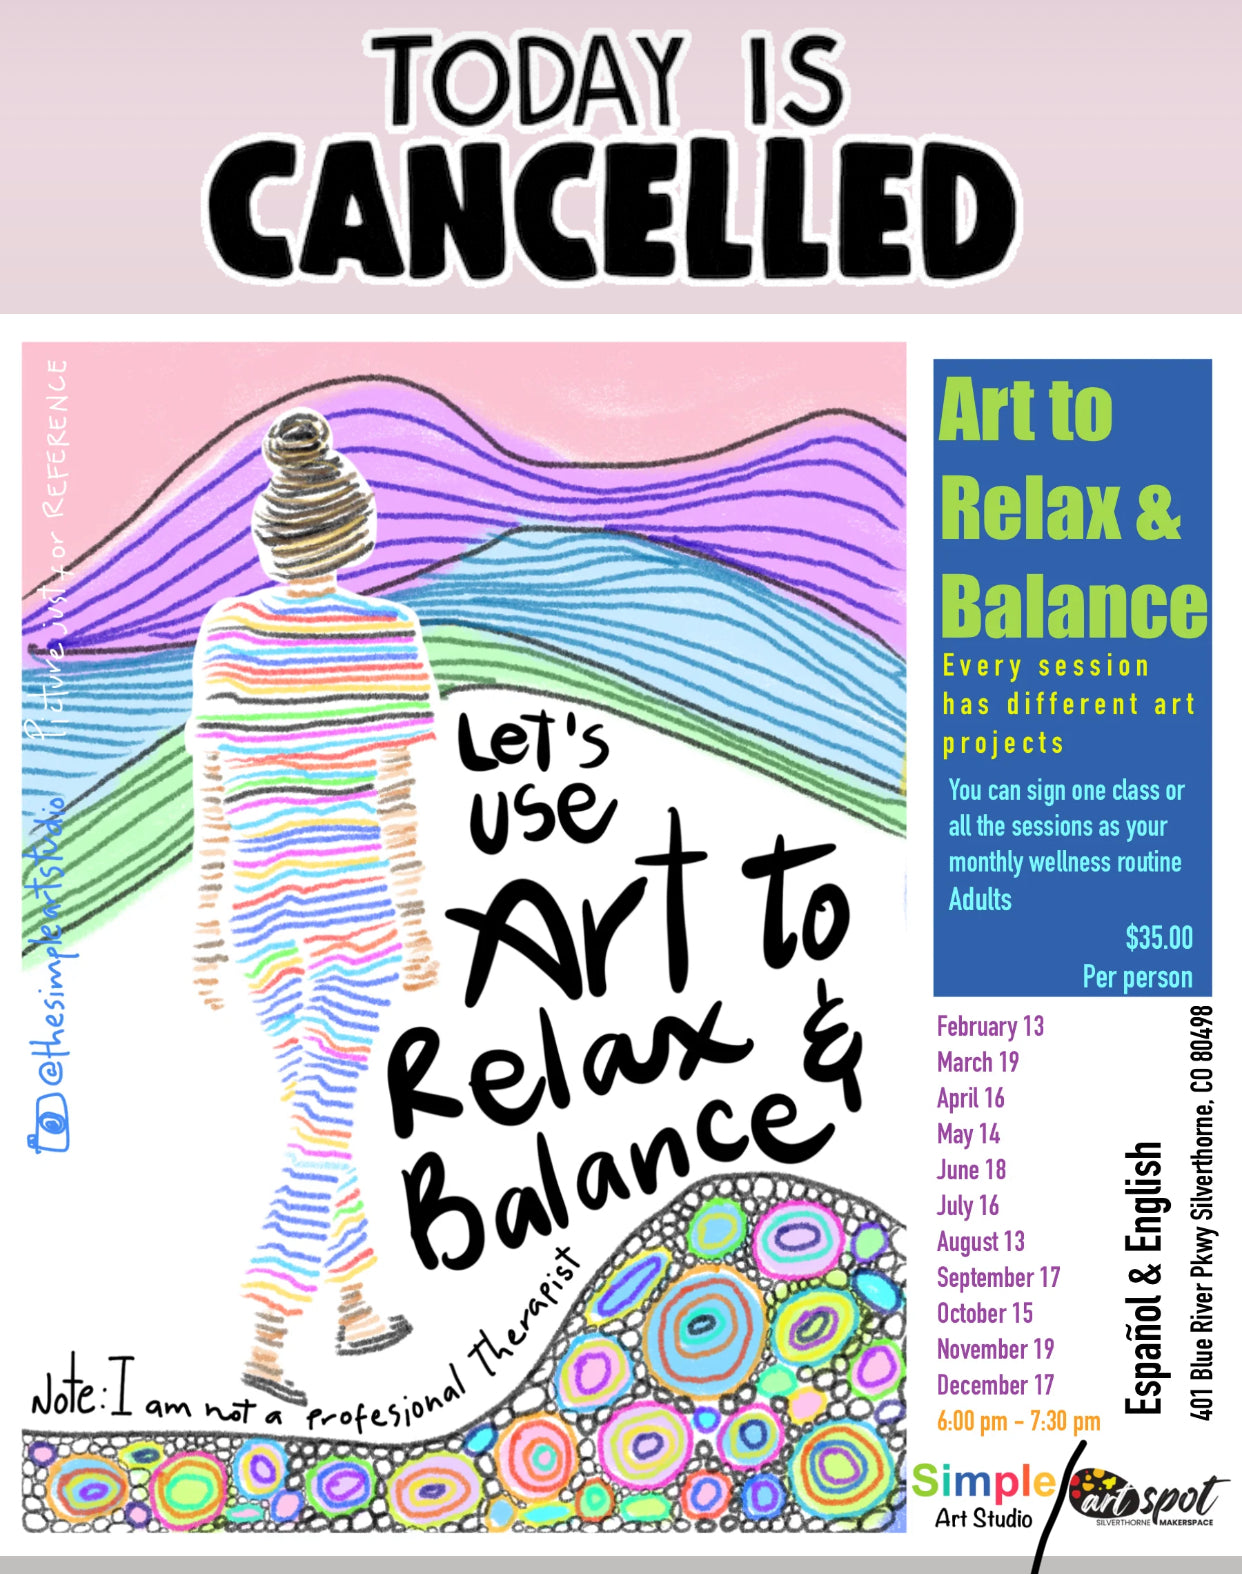 Art to Relax and Balance